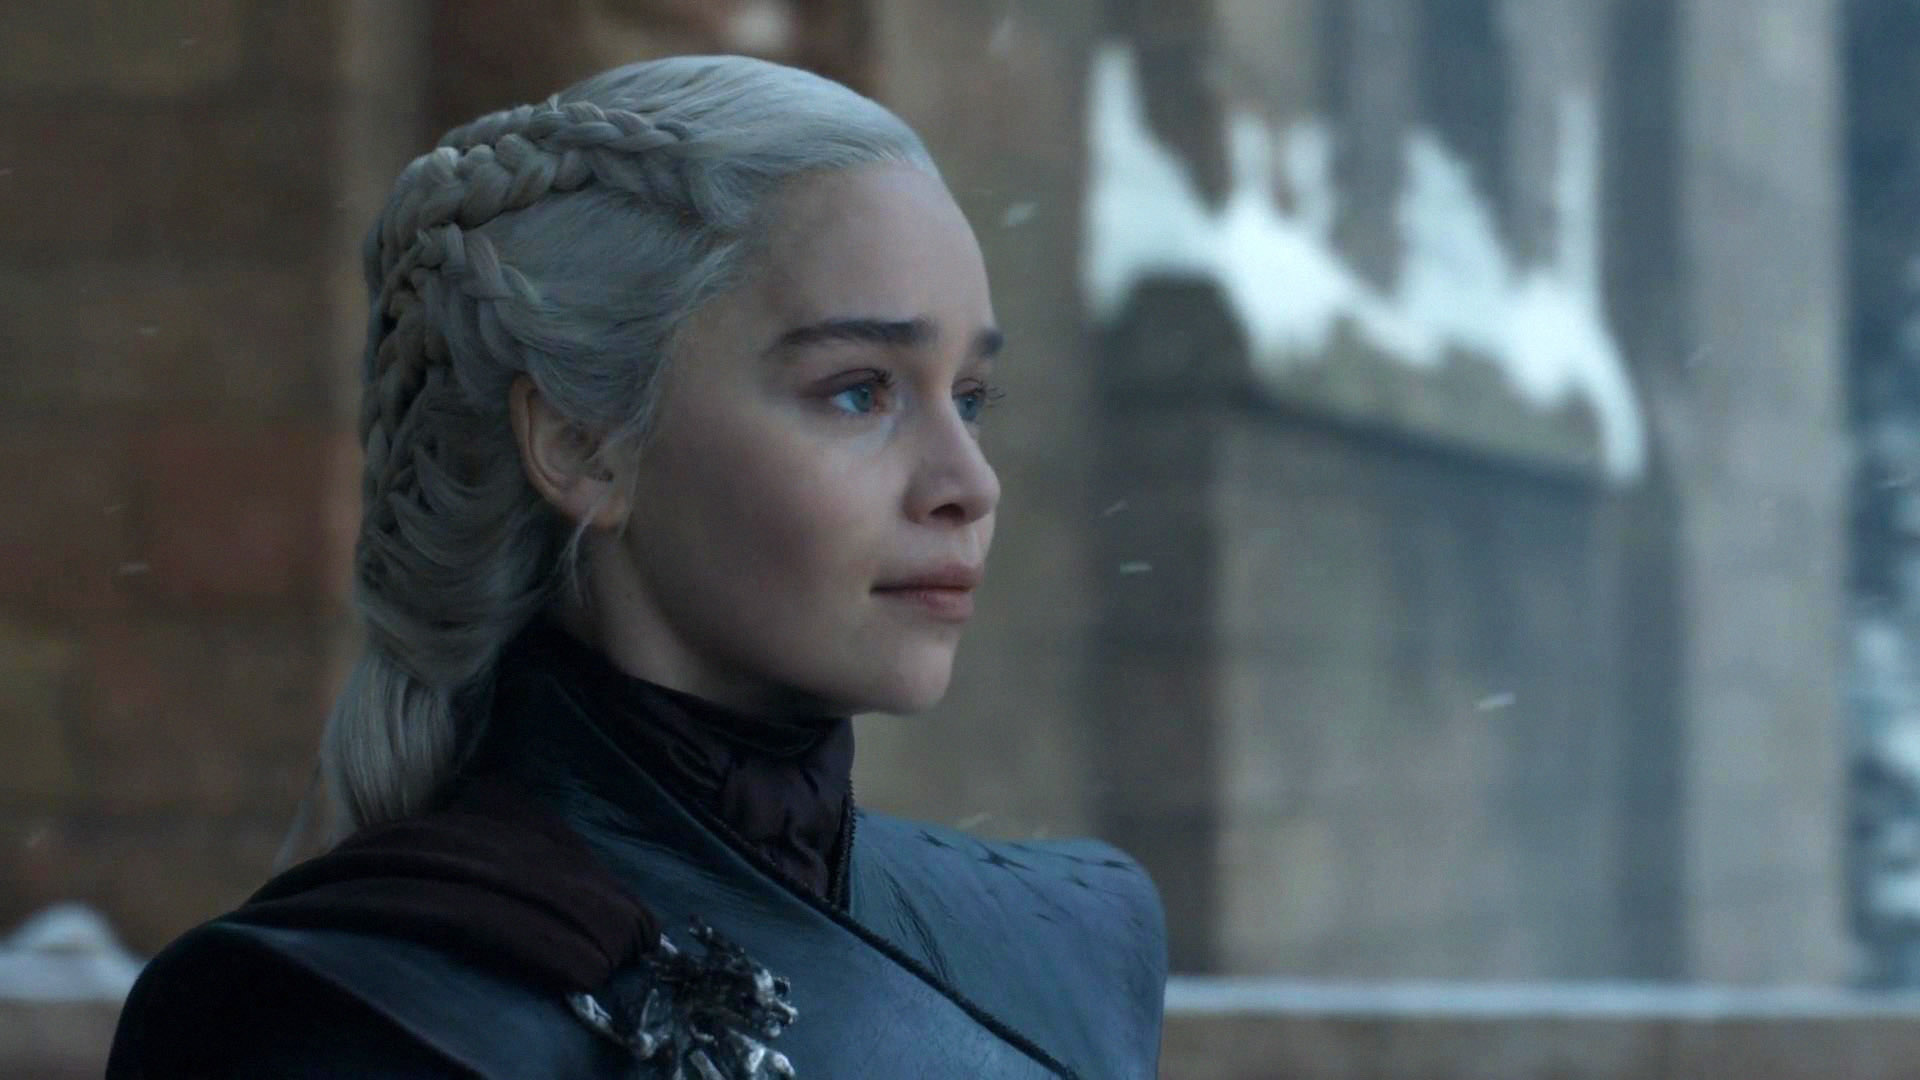 5 Biggest Game of Thrones Fails That Made Season 8 Irredeemable